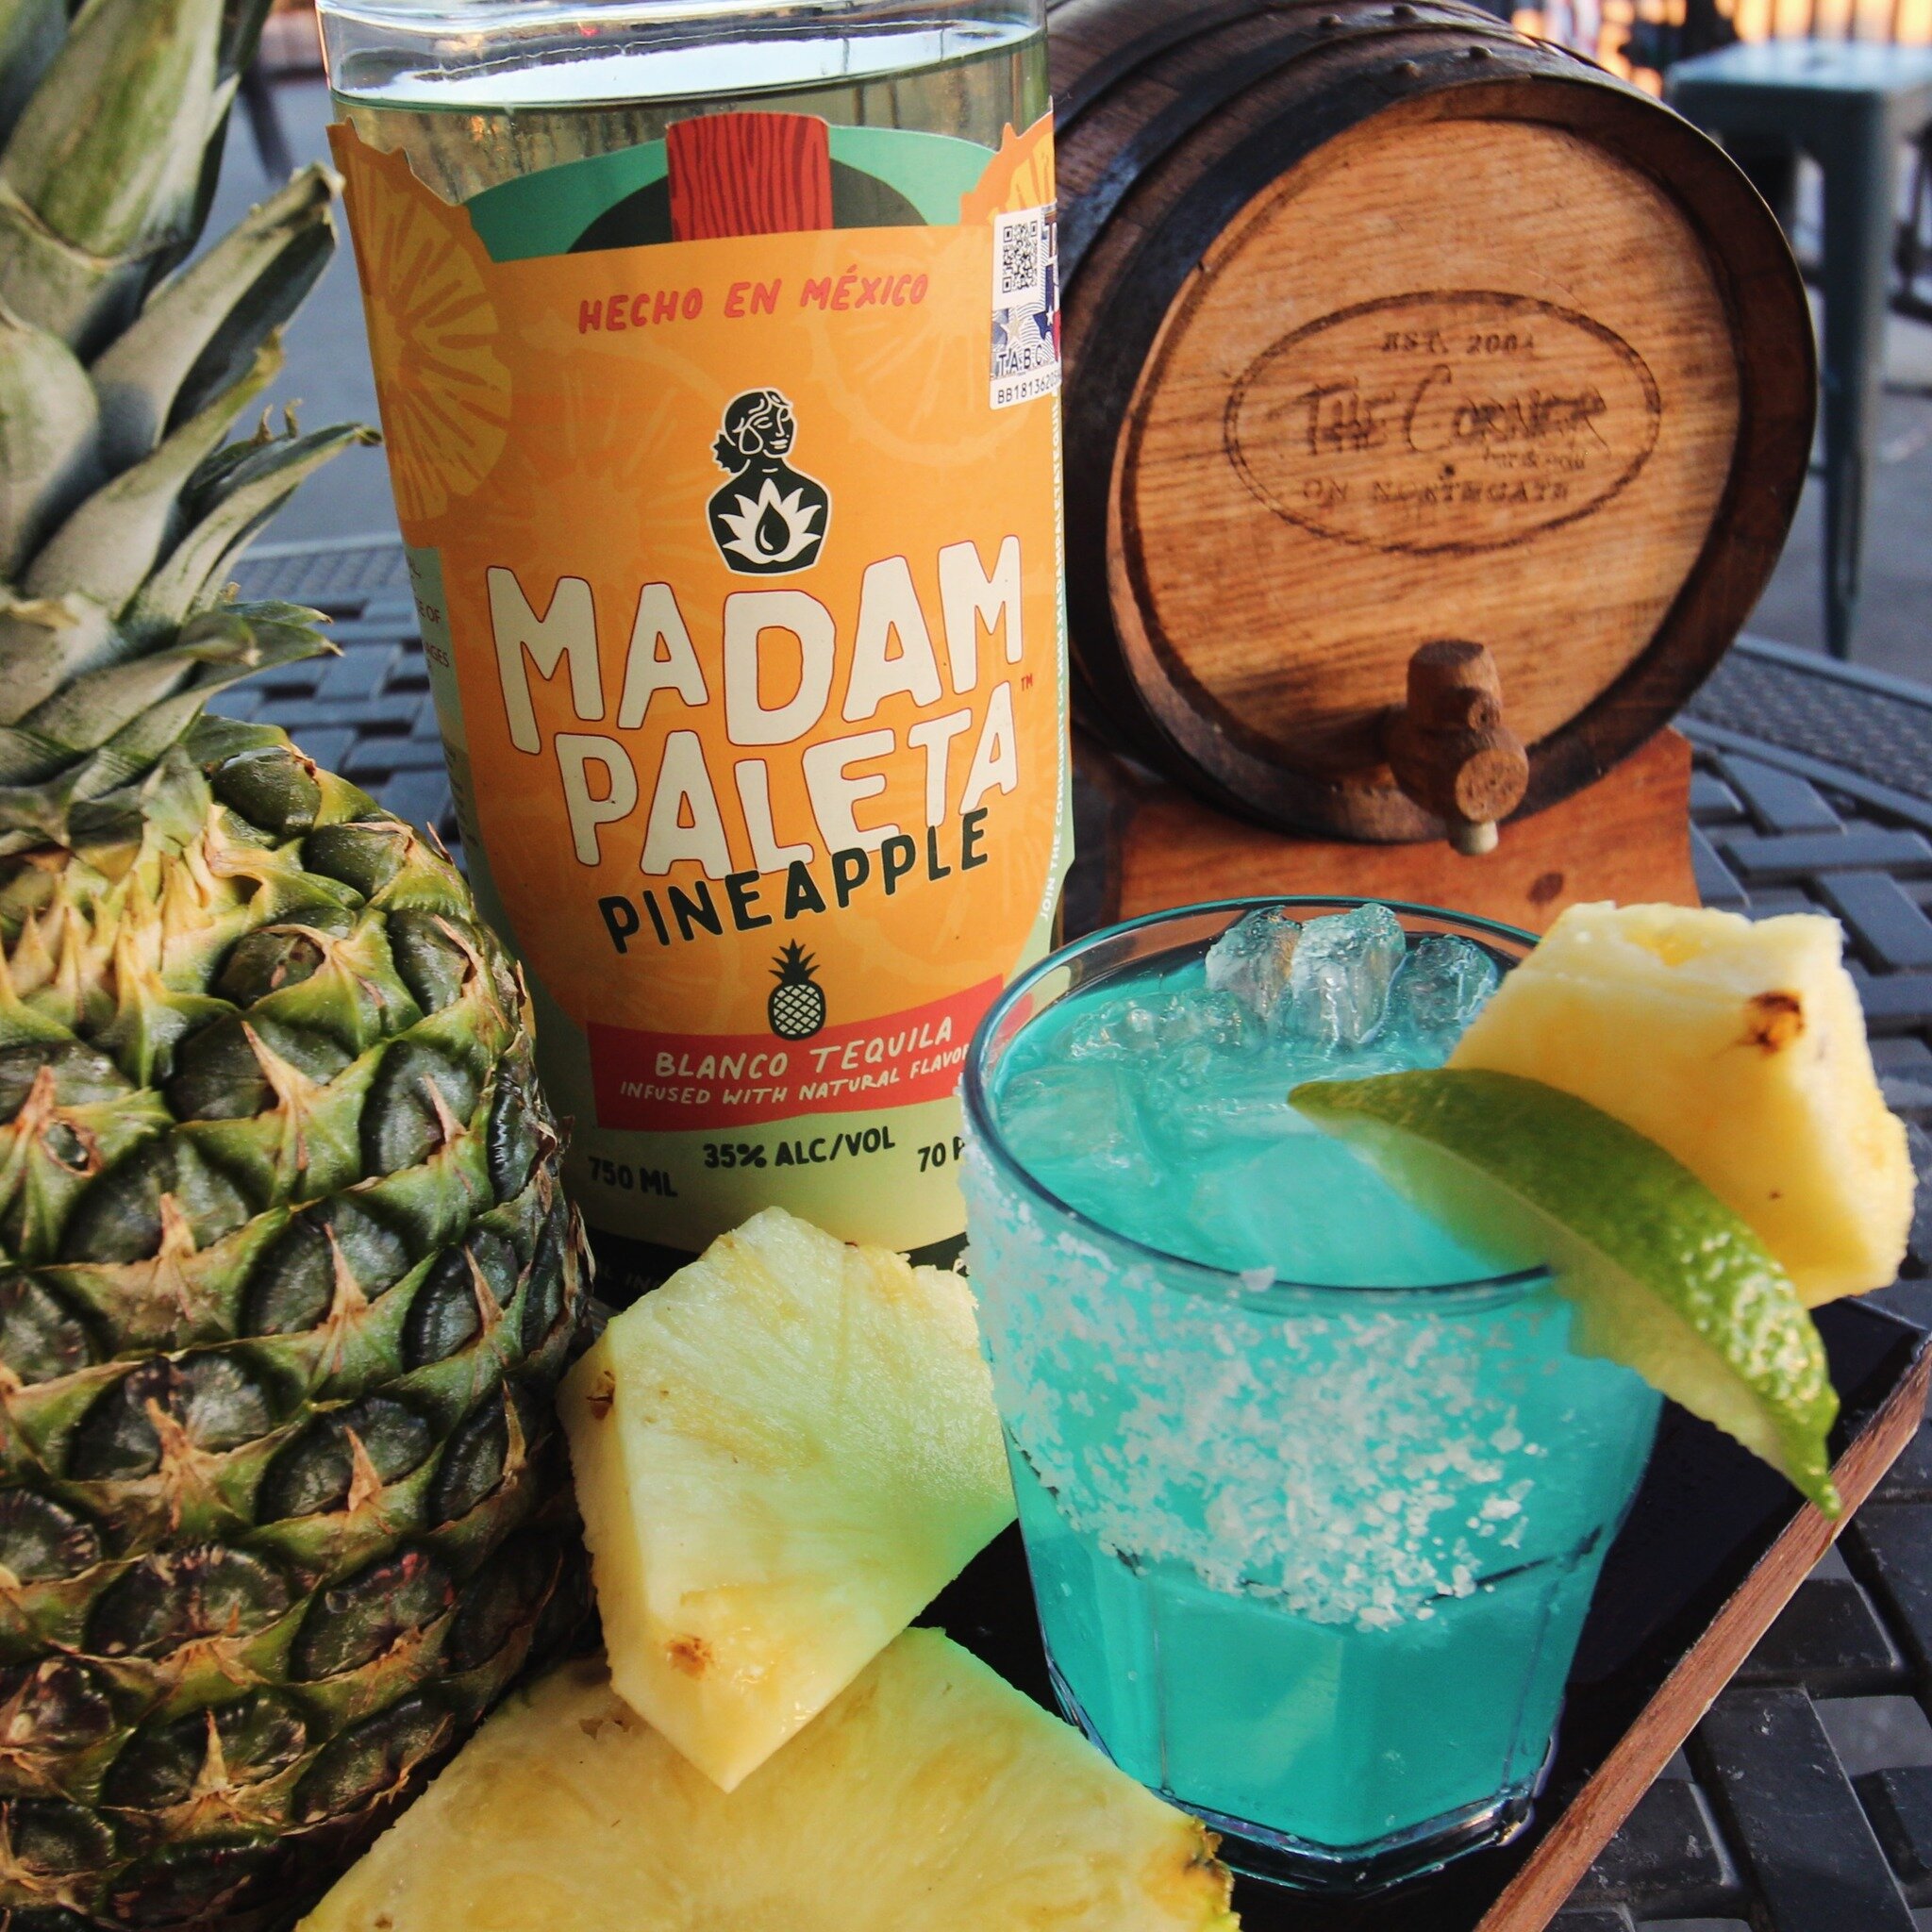 You may not be by the beach but doesn&rsquo;t mean your life has to be one. Enjoy our Blue Pineapple Margarita - the perfect drink for your College Station SB 😚🍹
.
.
.
Made w/ @madampaletatequila Pineapple, Blue Cura&ccedil;ao, Agave Syrup, Lime &a